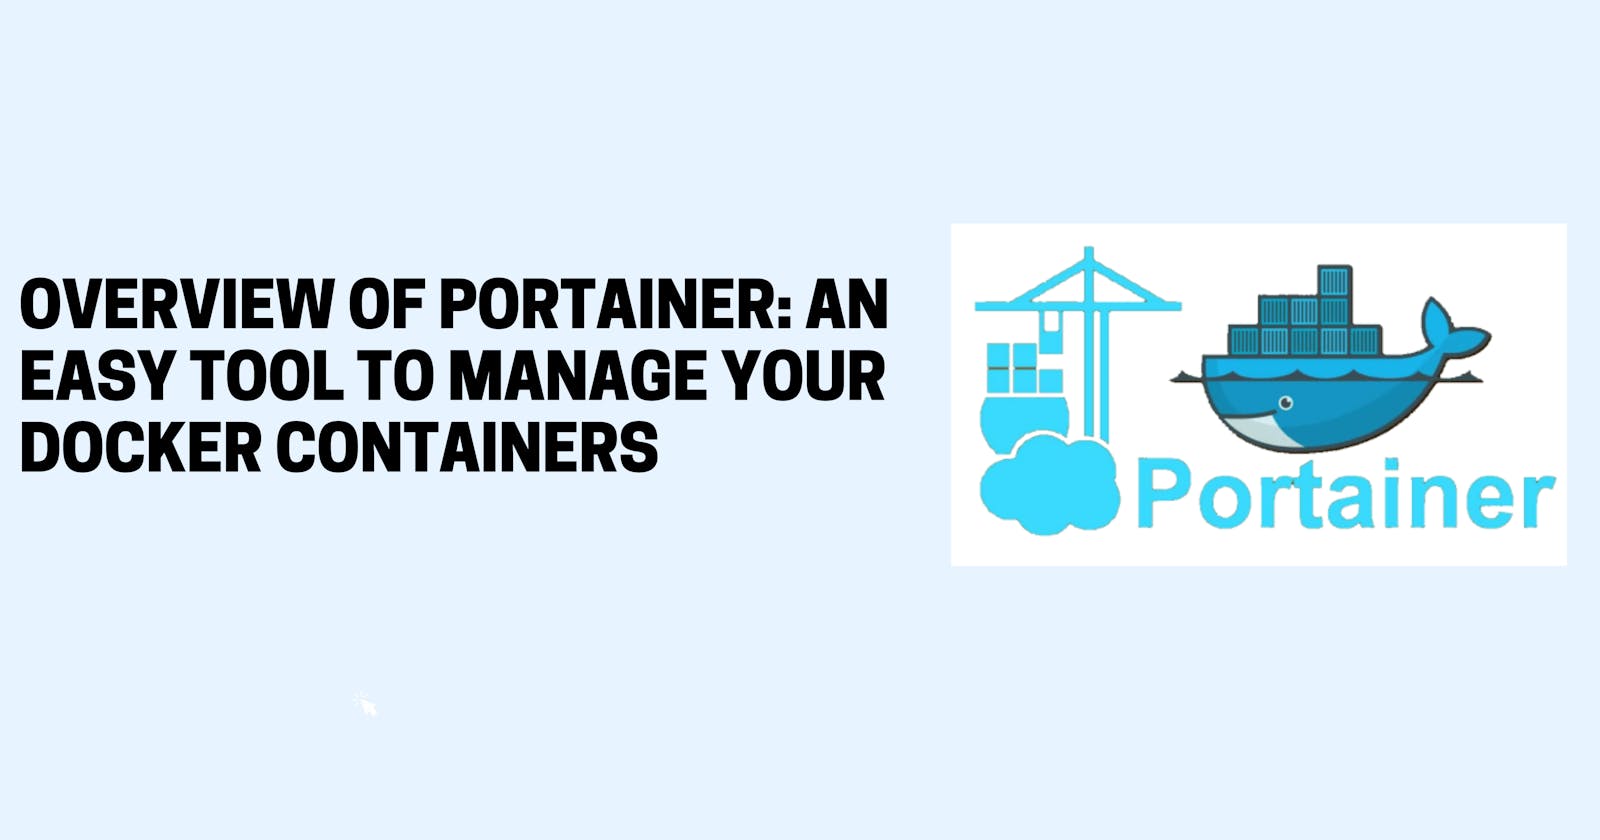 Overview of Portainer: An easy tool to manage your Docker containers